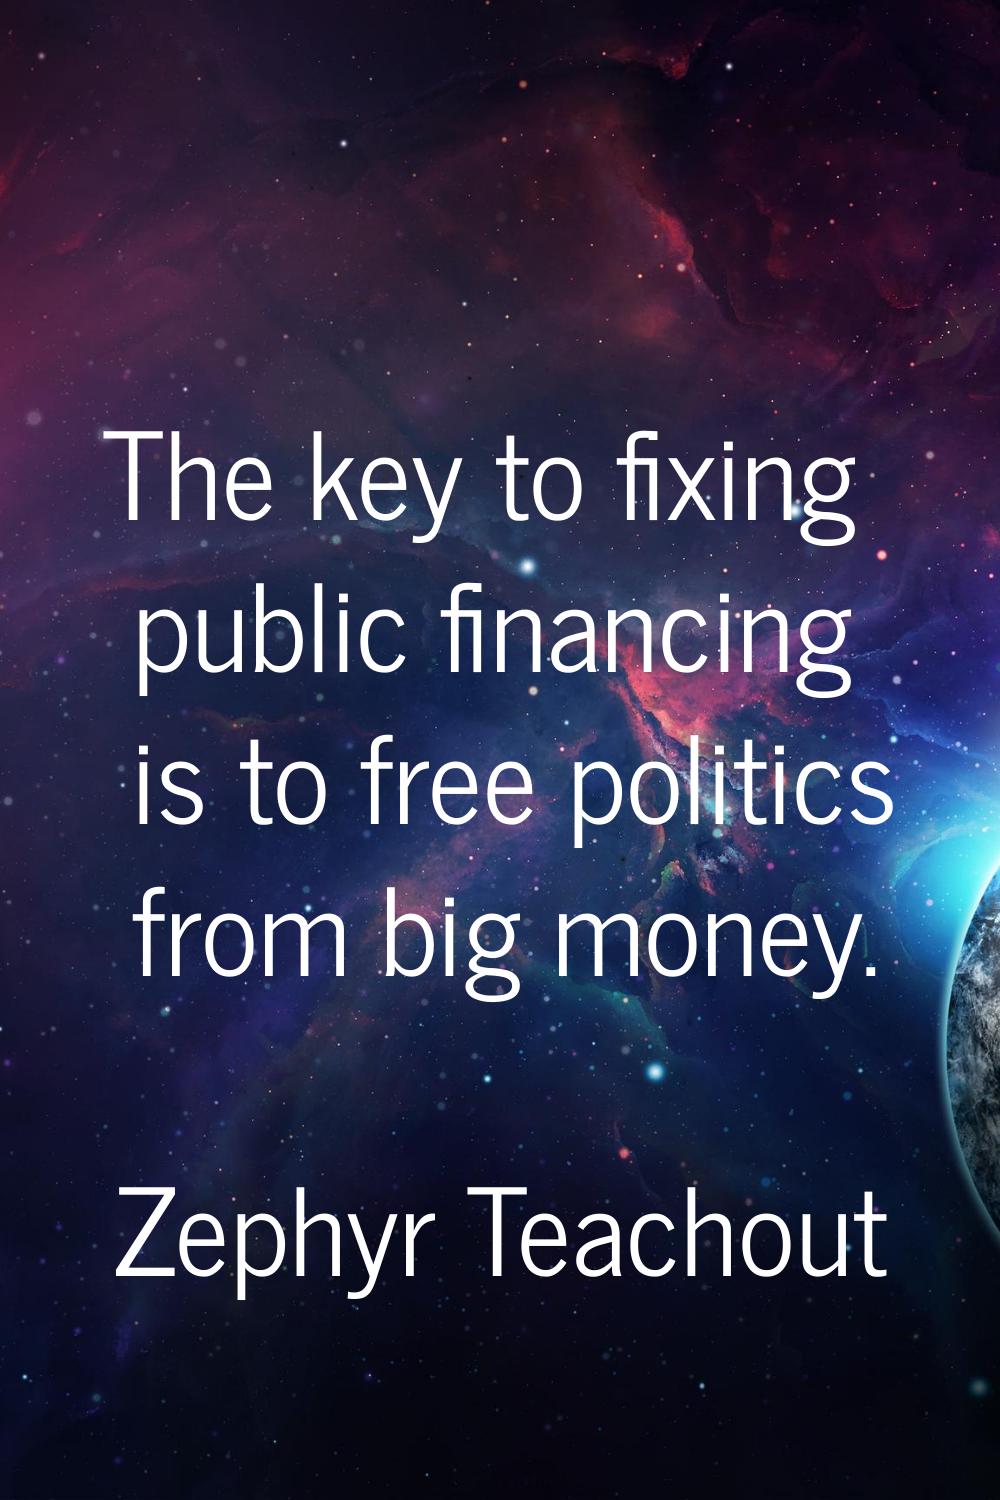 The key to fixing public financing is to free politics from big money.